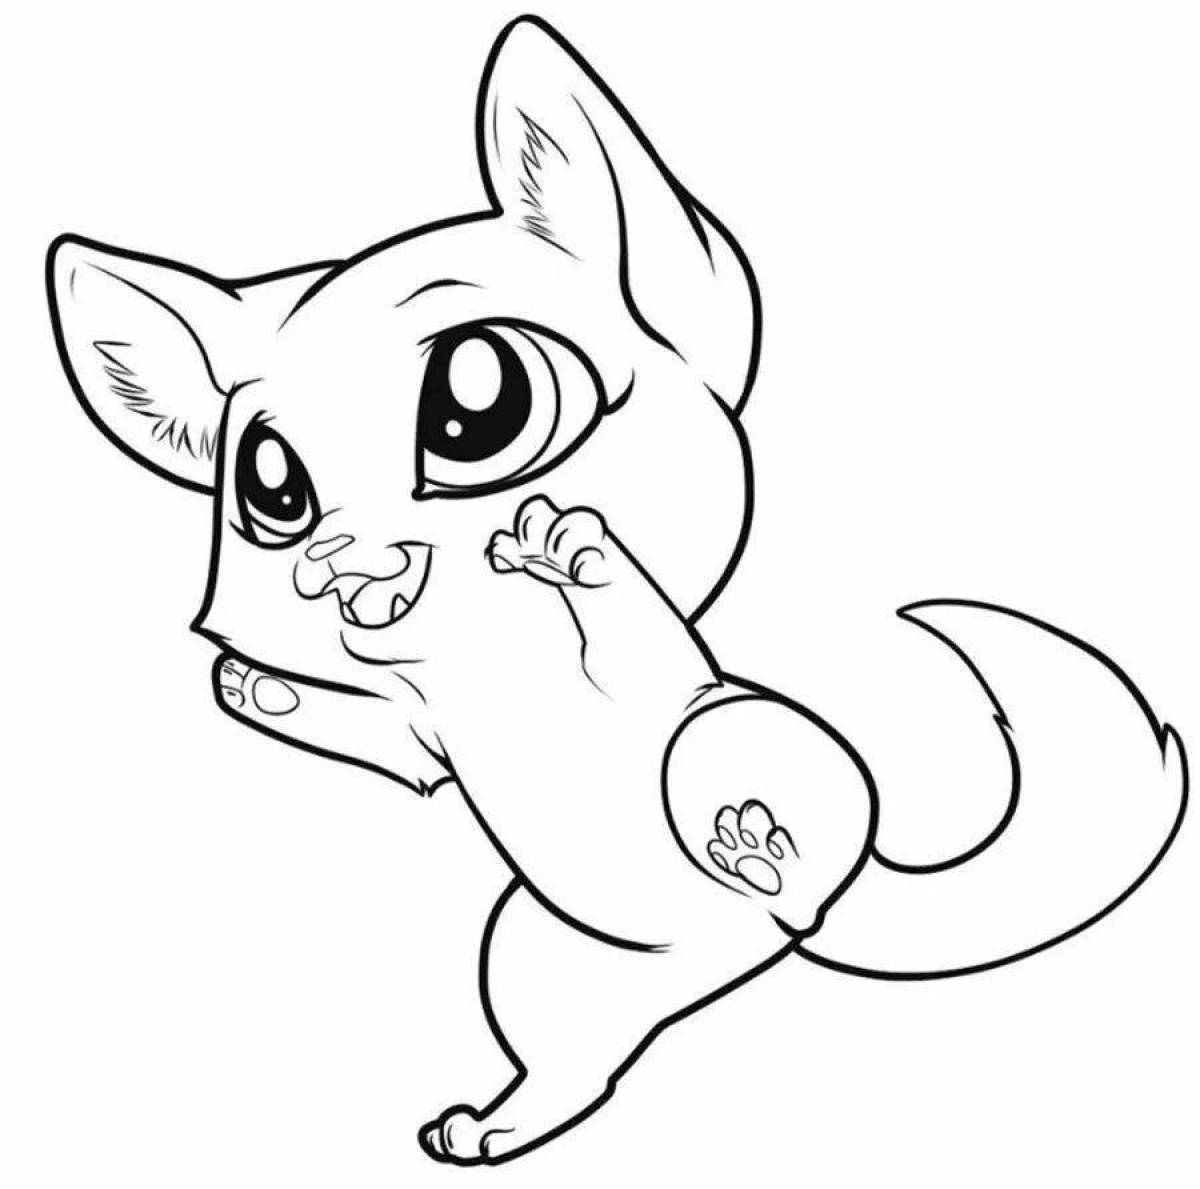 Coloring page of button cute kittens